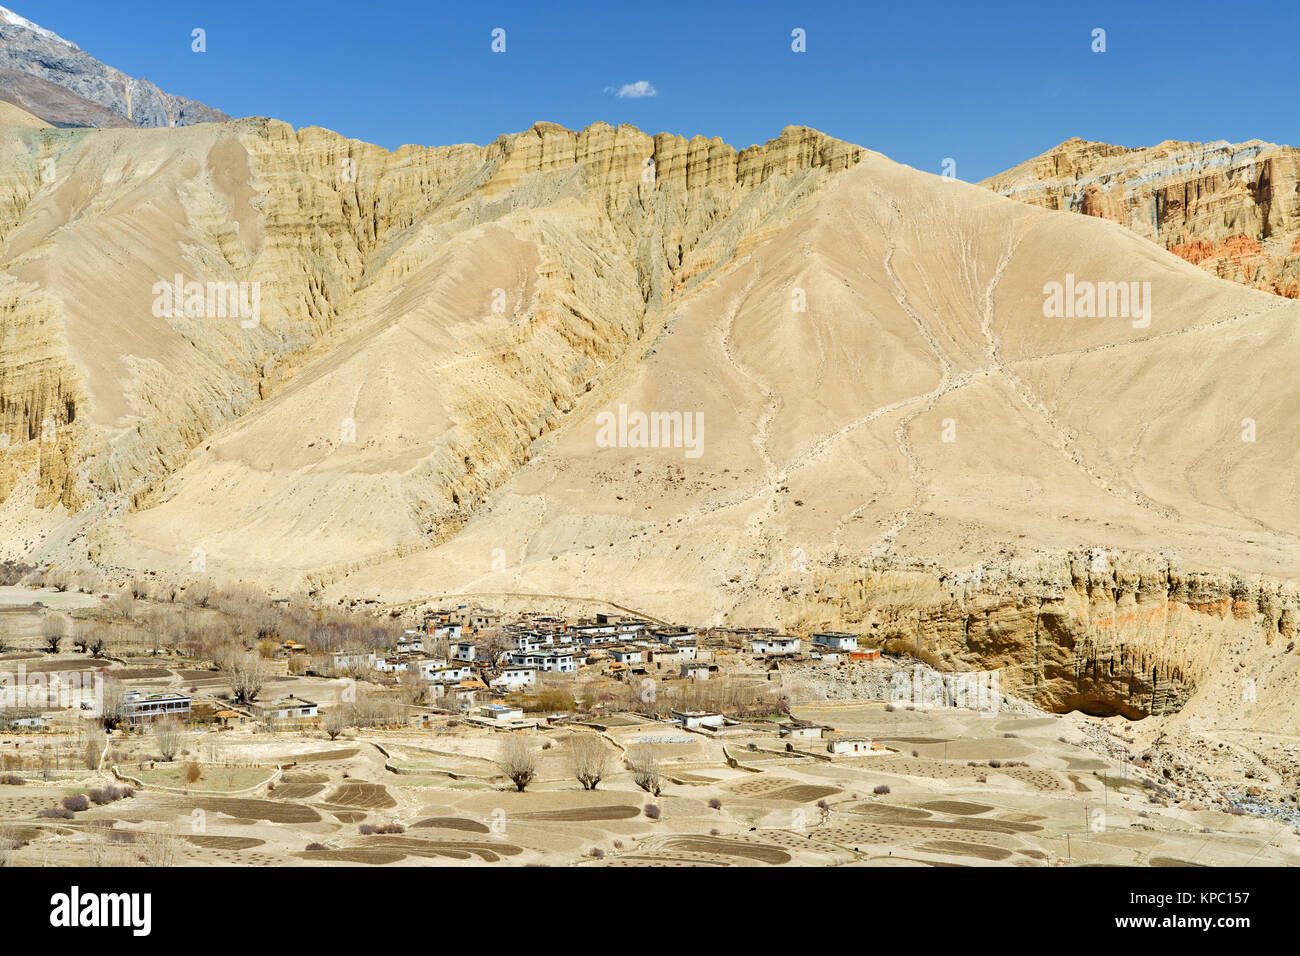 Village of Ghemi, Upper Mustang region, Nepal, viewed from a distance amidst a barren desertic landscape. Stock Photo